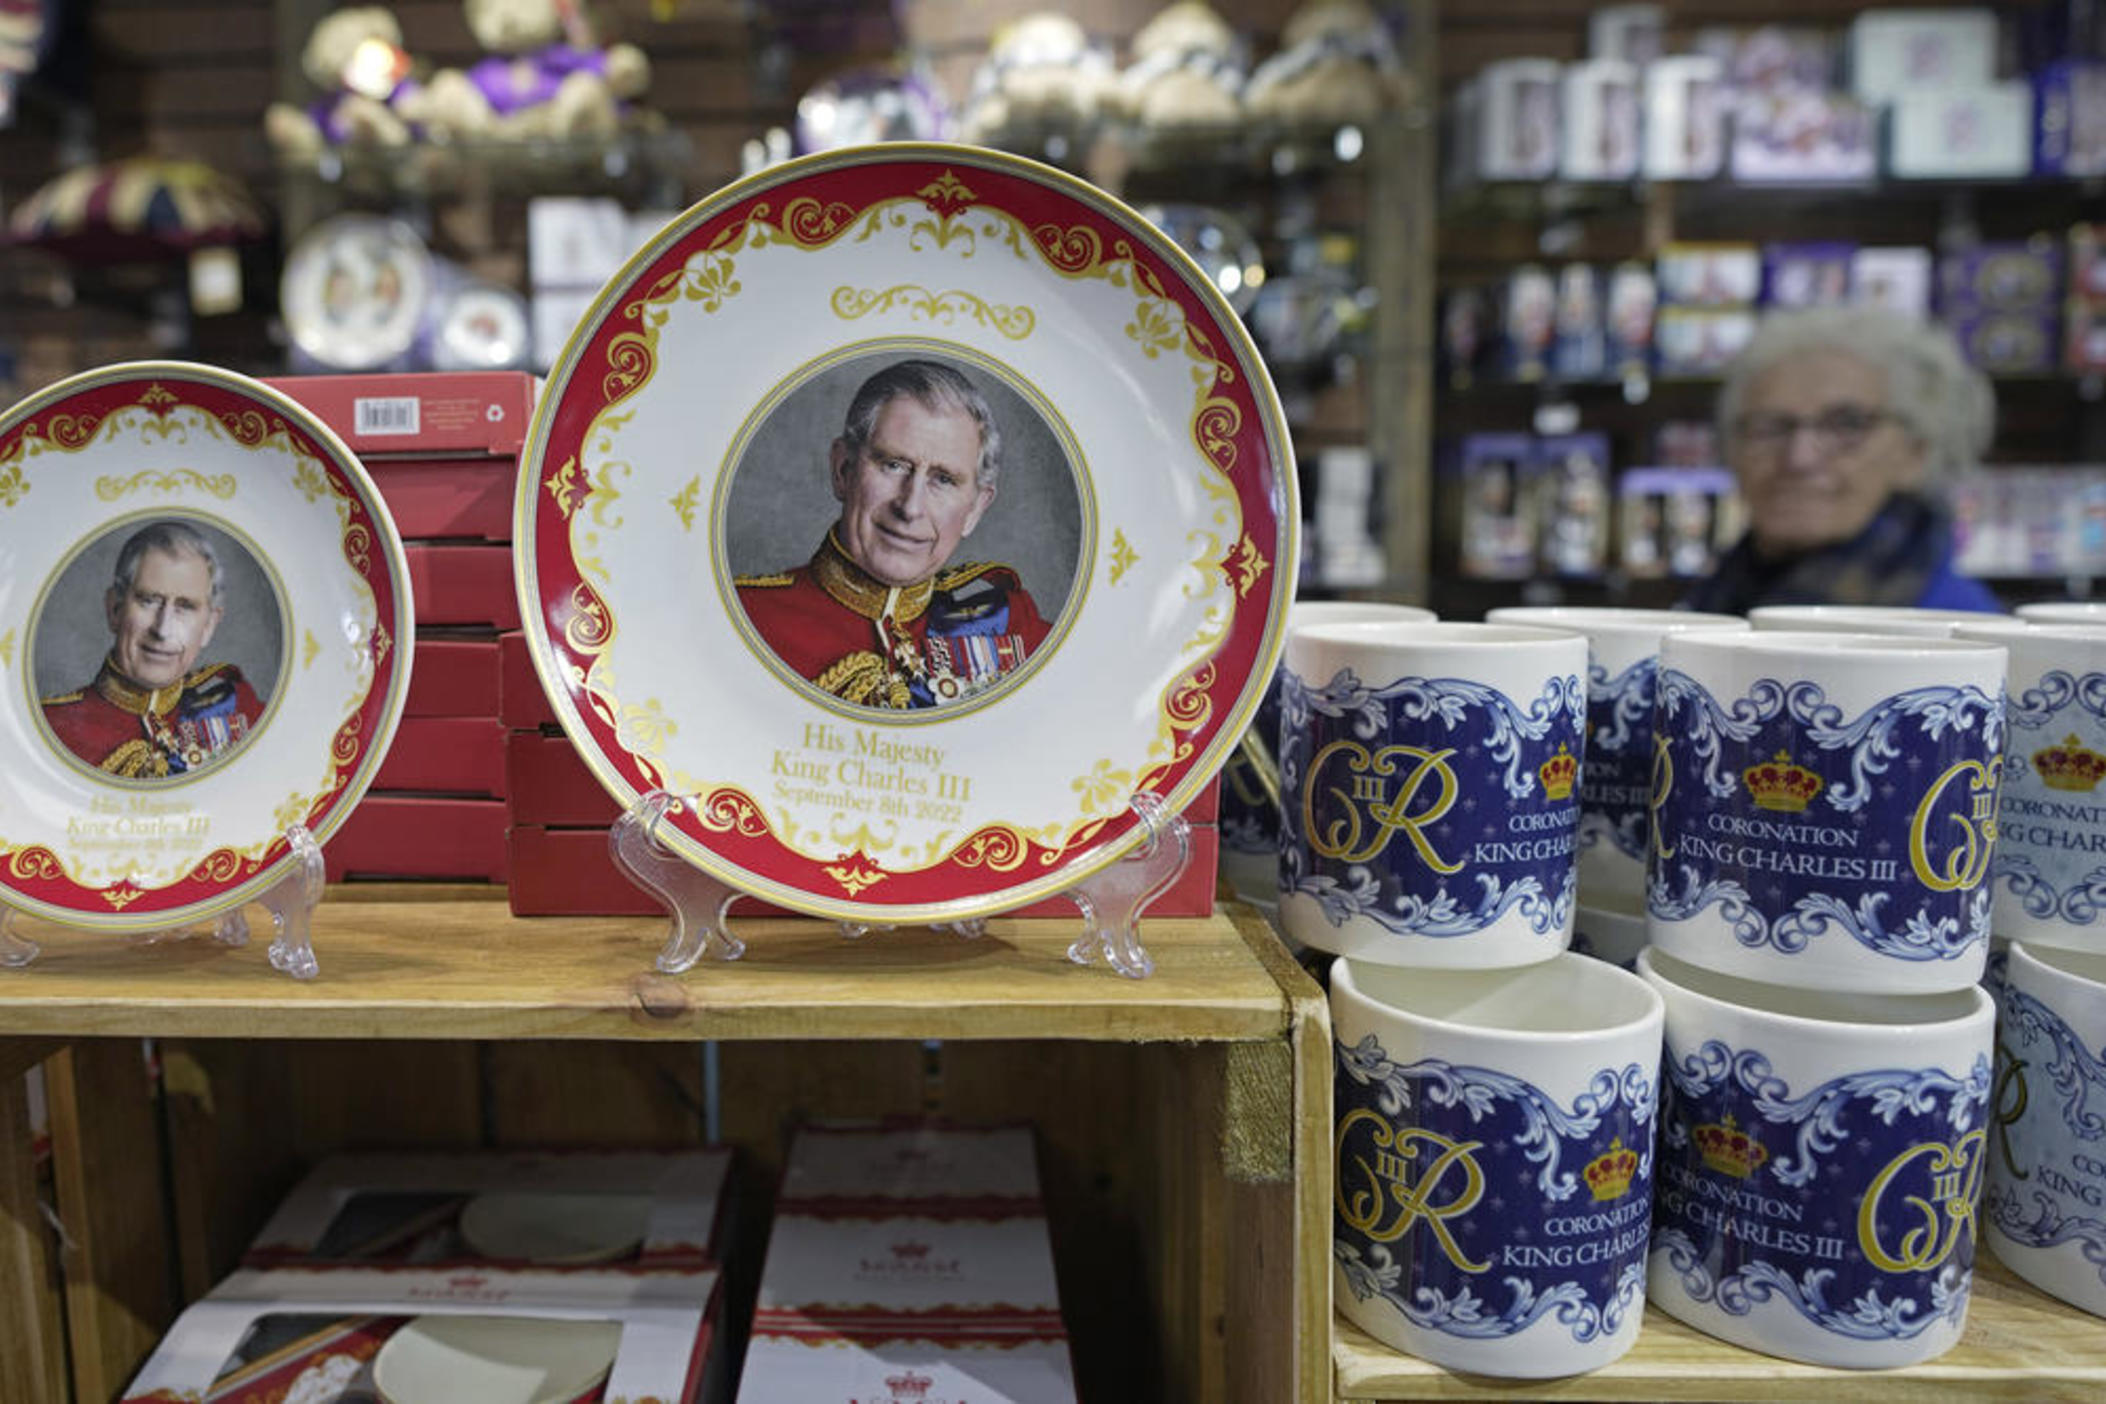 Coronation plates and cups are displayed for sale in a gift shop in London on April 24. 